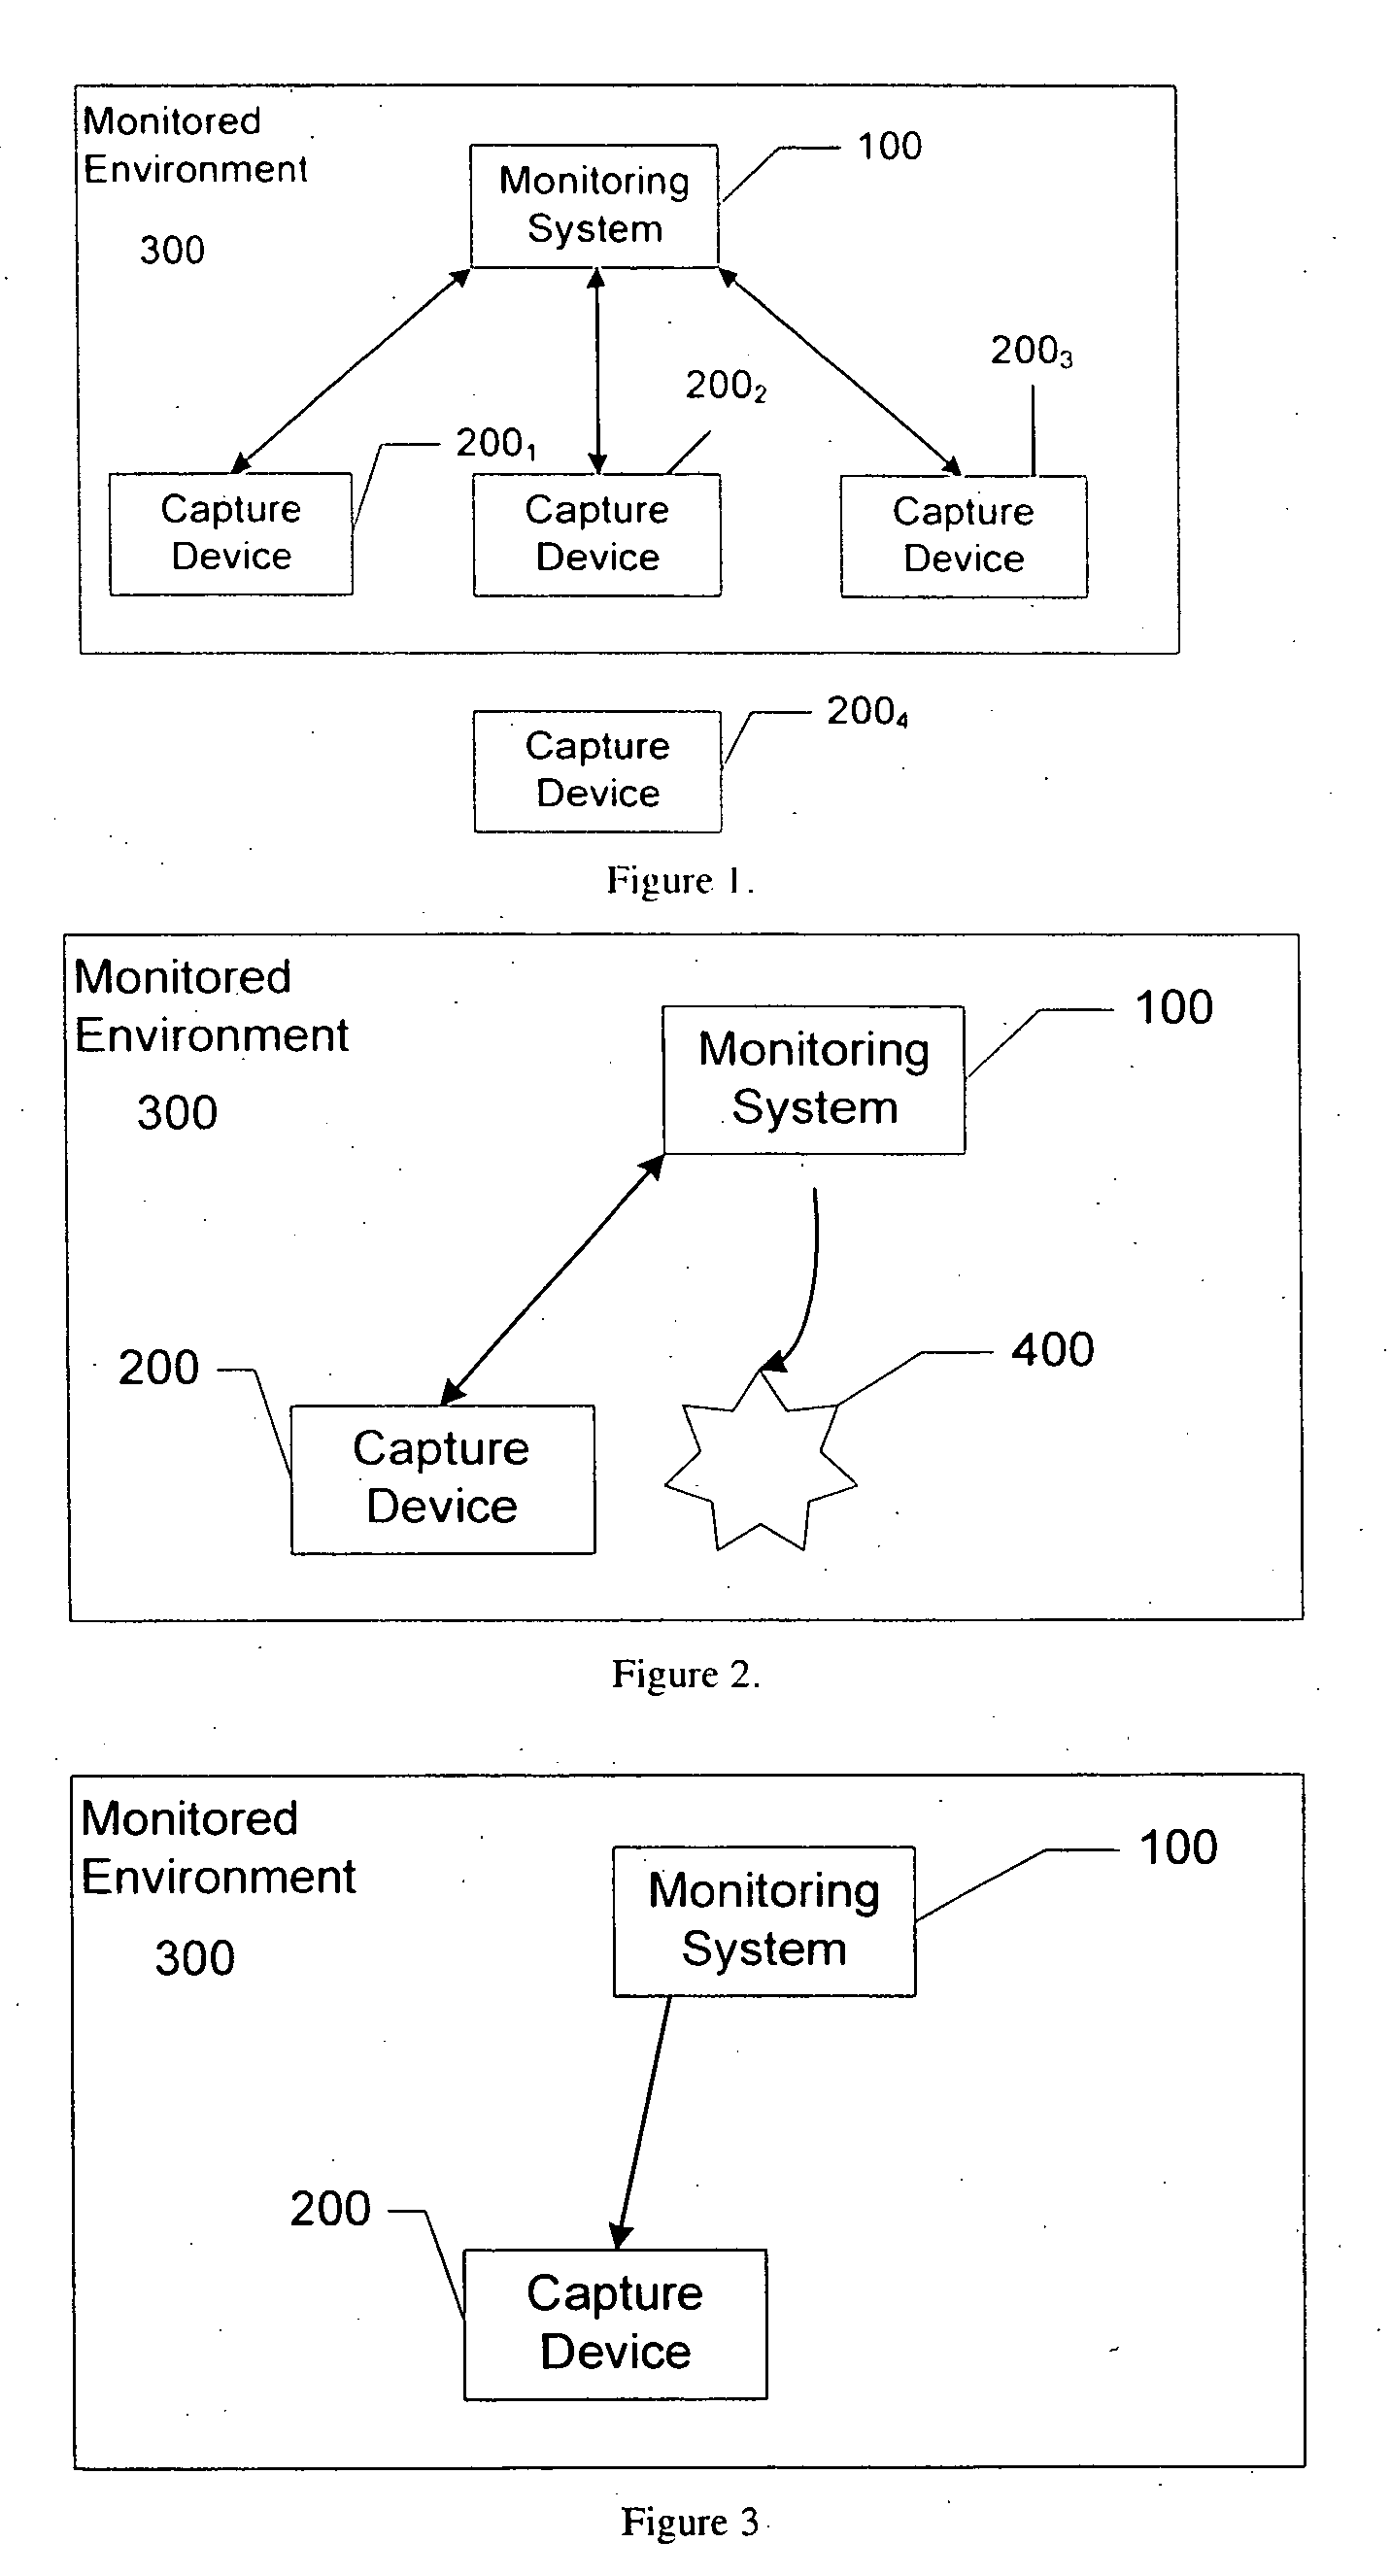 Method and system to announce or prevent voyeur recording in a monitored environment